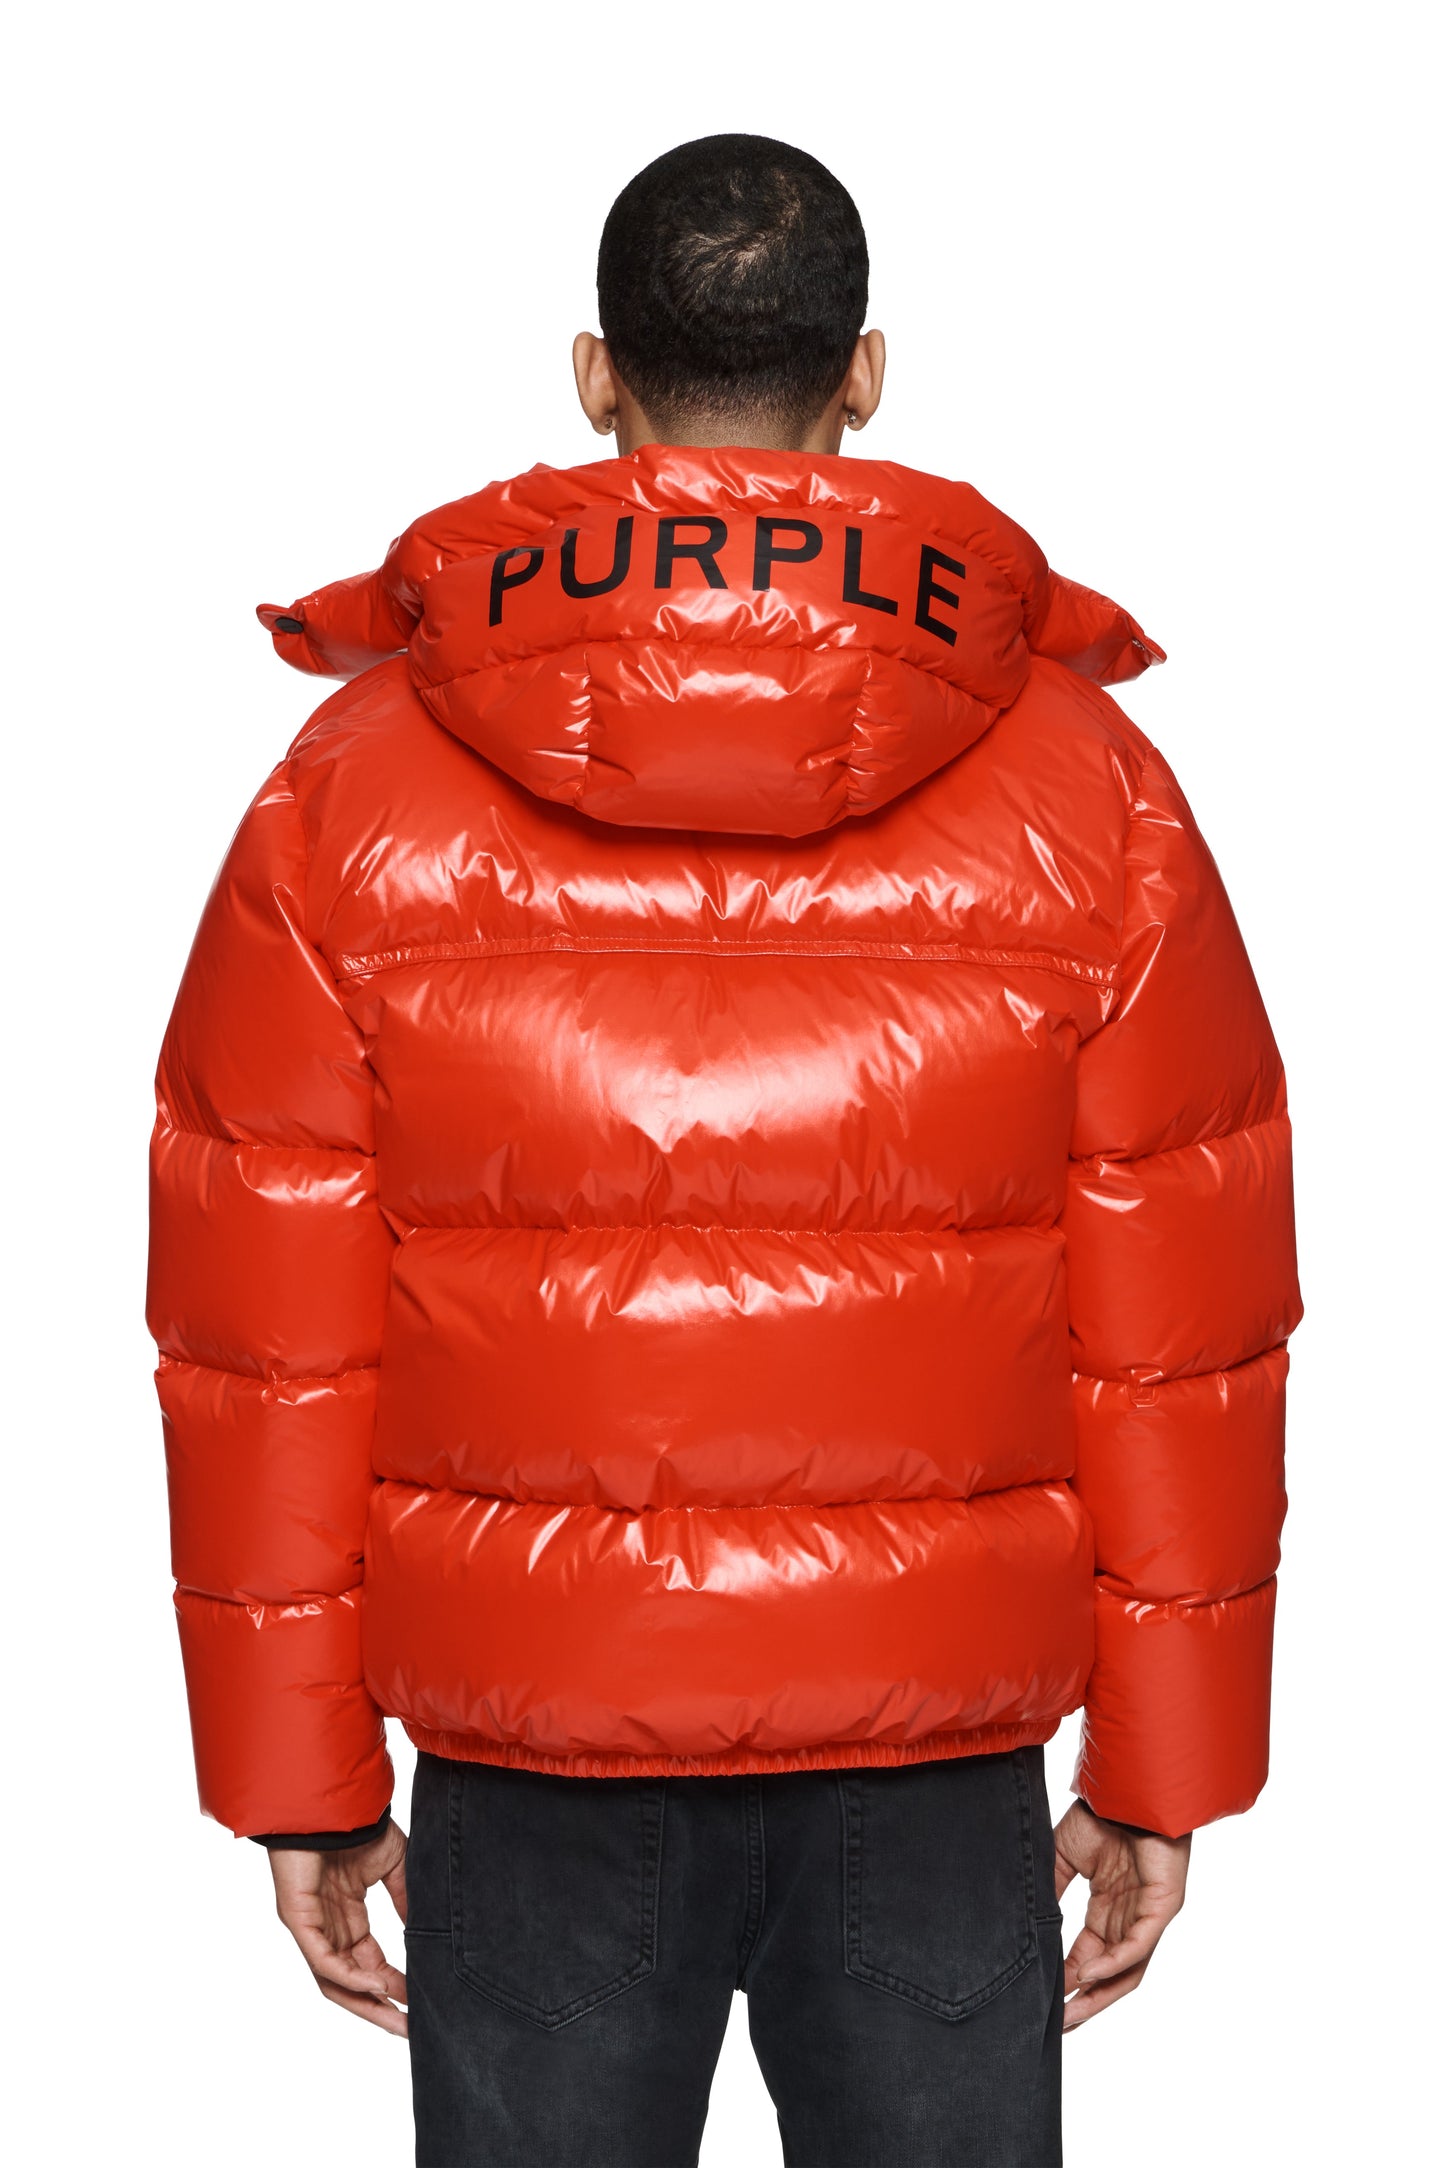 PUFFER JACKET - Red